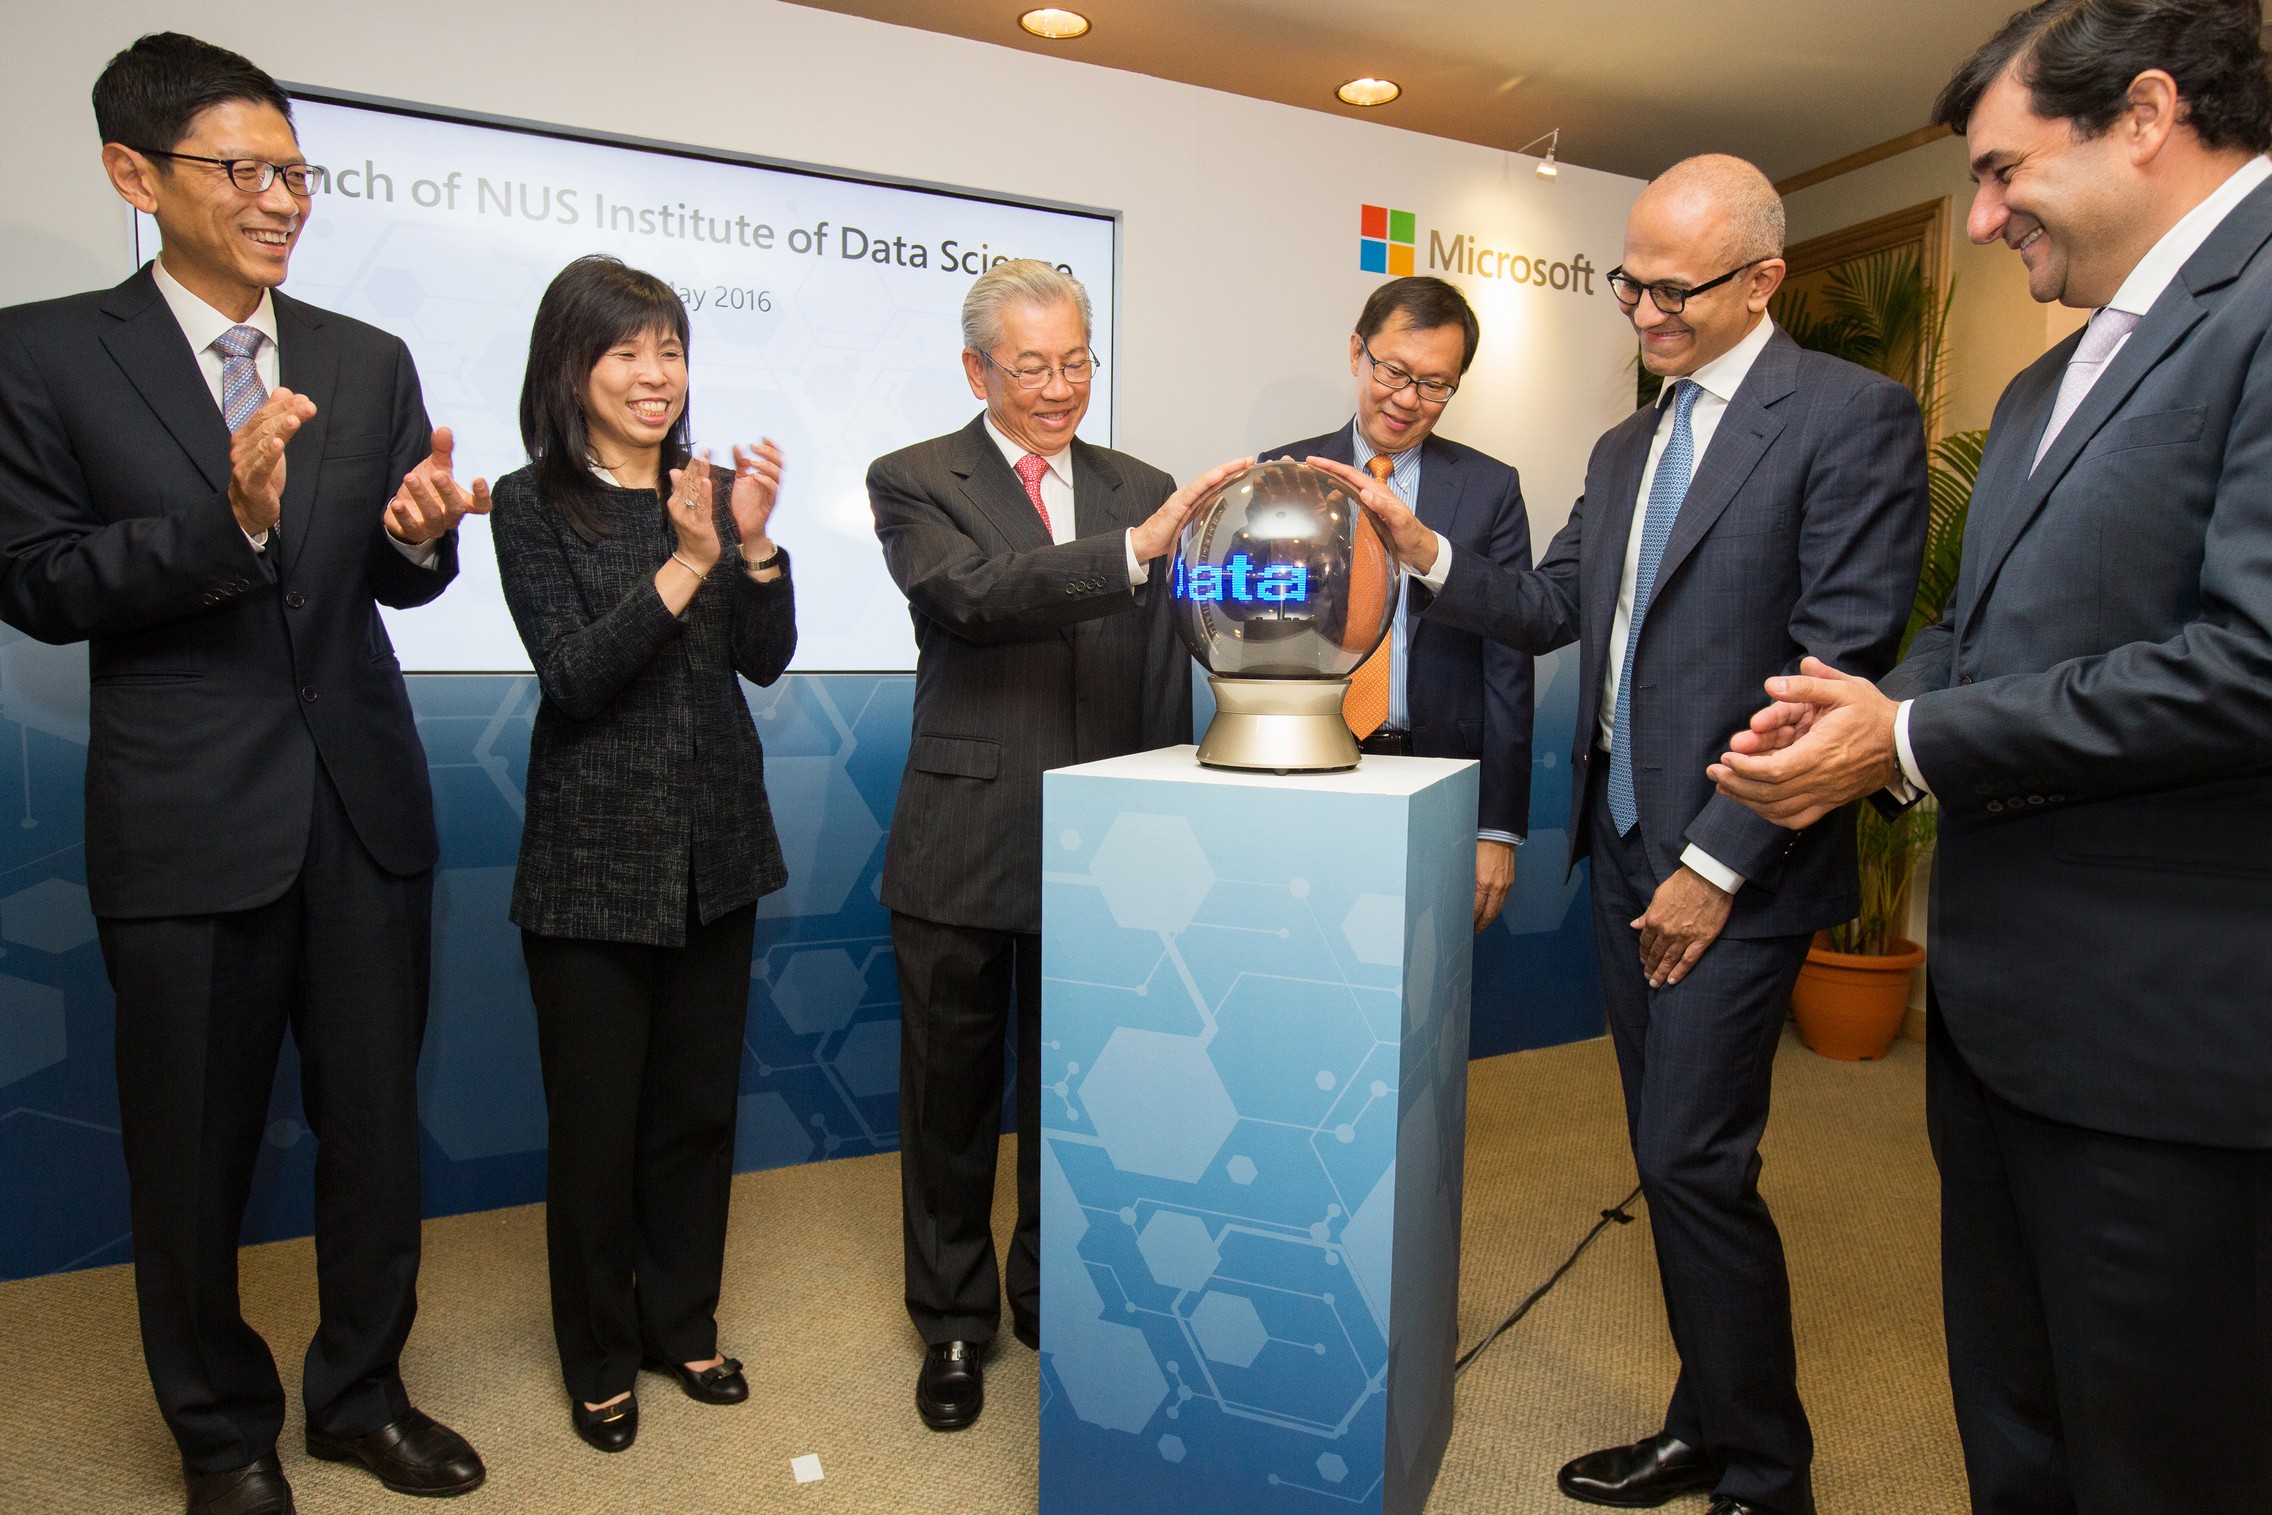 Wong Ngit Liong, Chairman of NUS Board of Trustees and Satya Nadella, CEO of Microsoft, jointly launch the new NUS Institute of Data Science, with Professor Tan Chorh Chuan, President of NUS, Jessica Tan, Managing Director of Microsoft Singapore, Professor Ho Teck Hua, Deputy President (Research & Technology) of NUS and Cesar Cernuda, President of Microsoft Asia Pacific looking on.